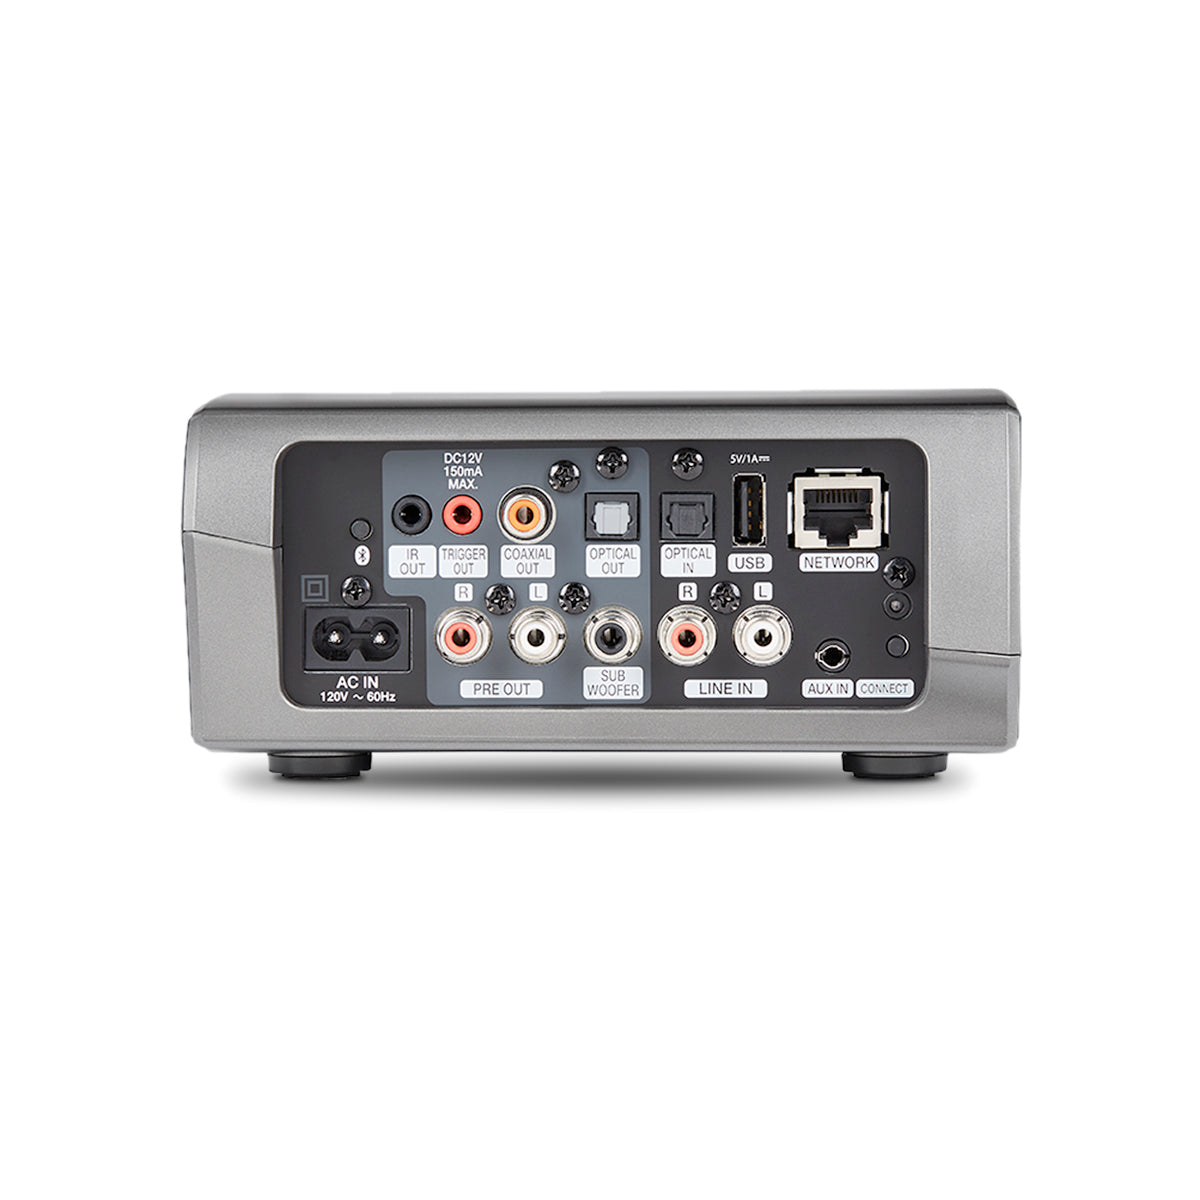 HEOS Link HS2 Wireless Network Player - The Audio Experts